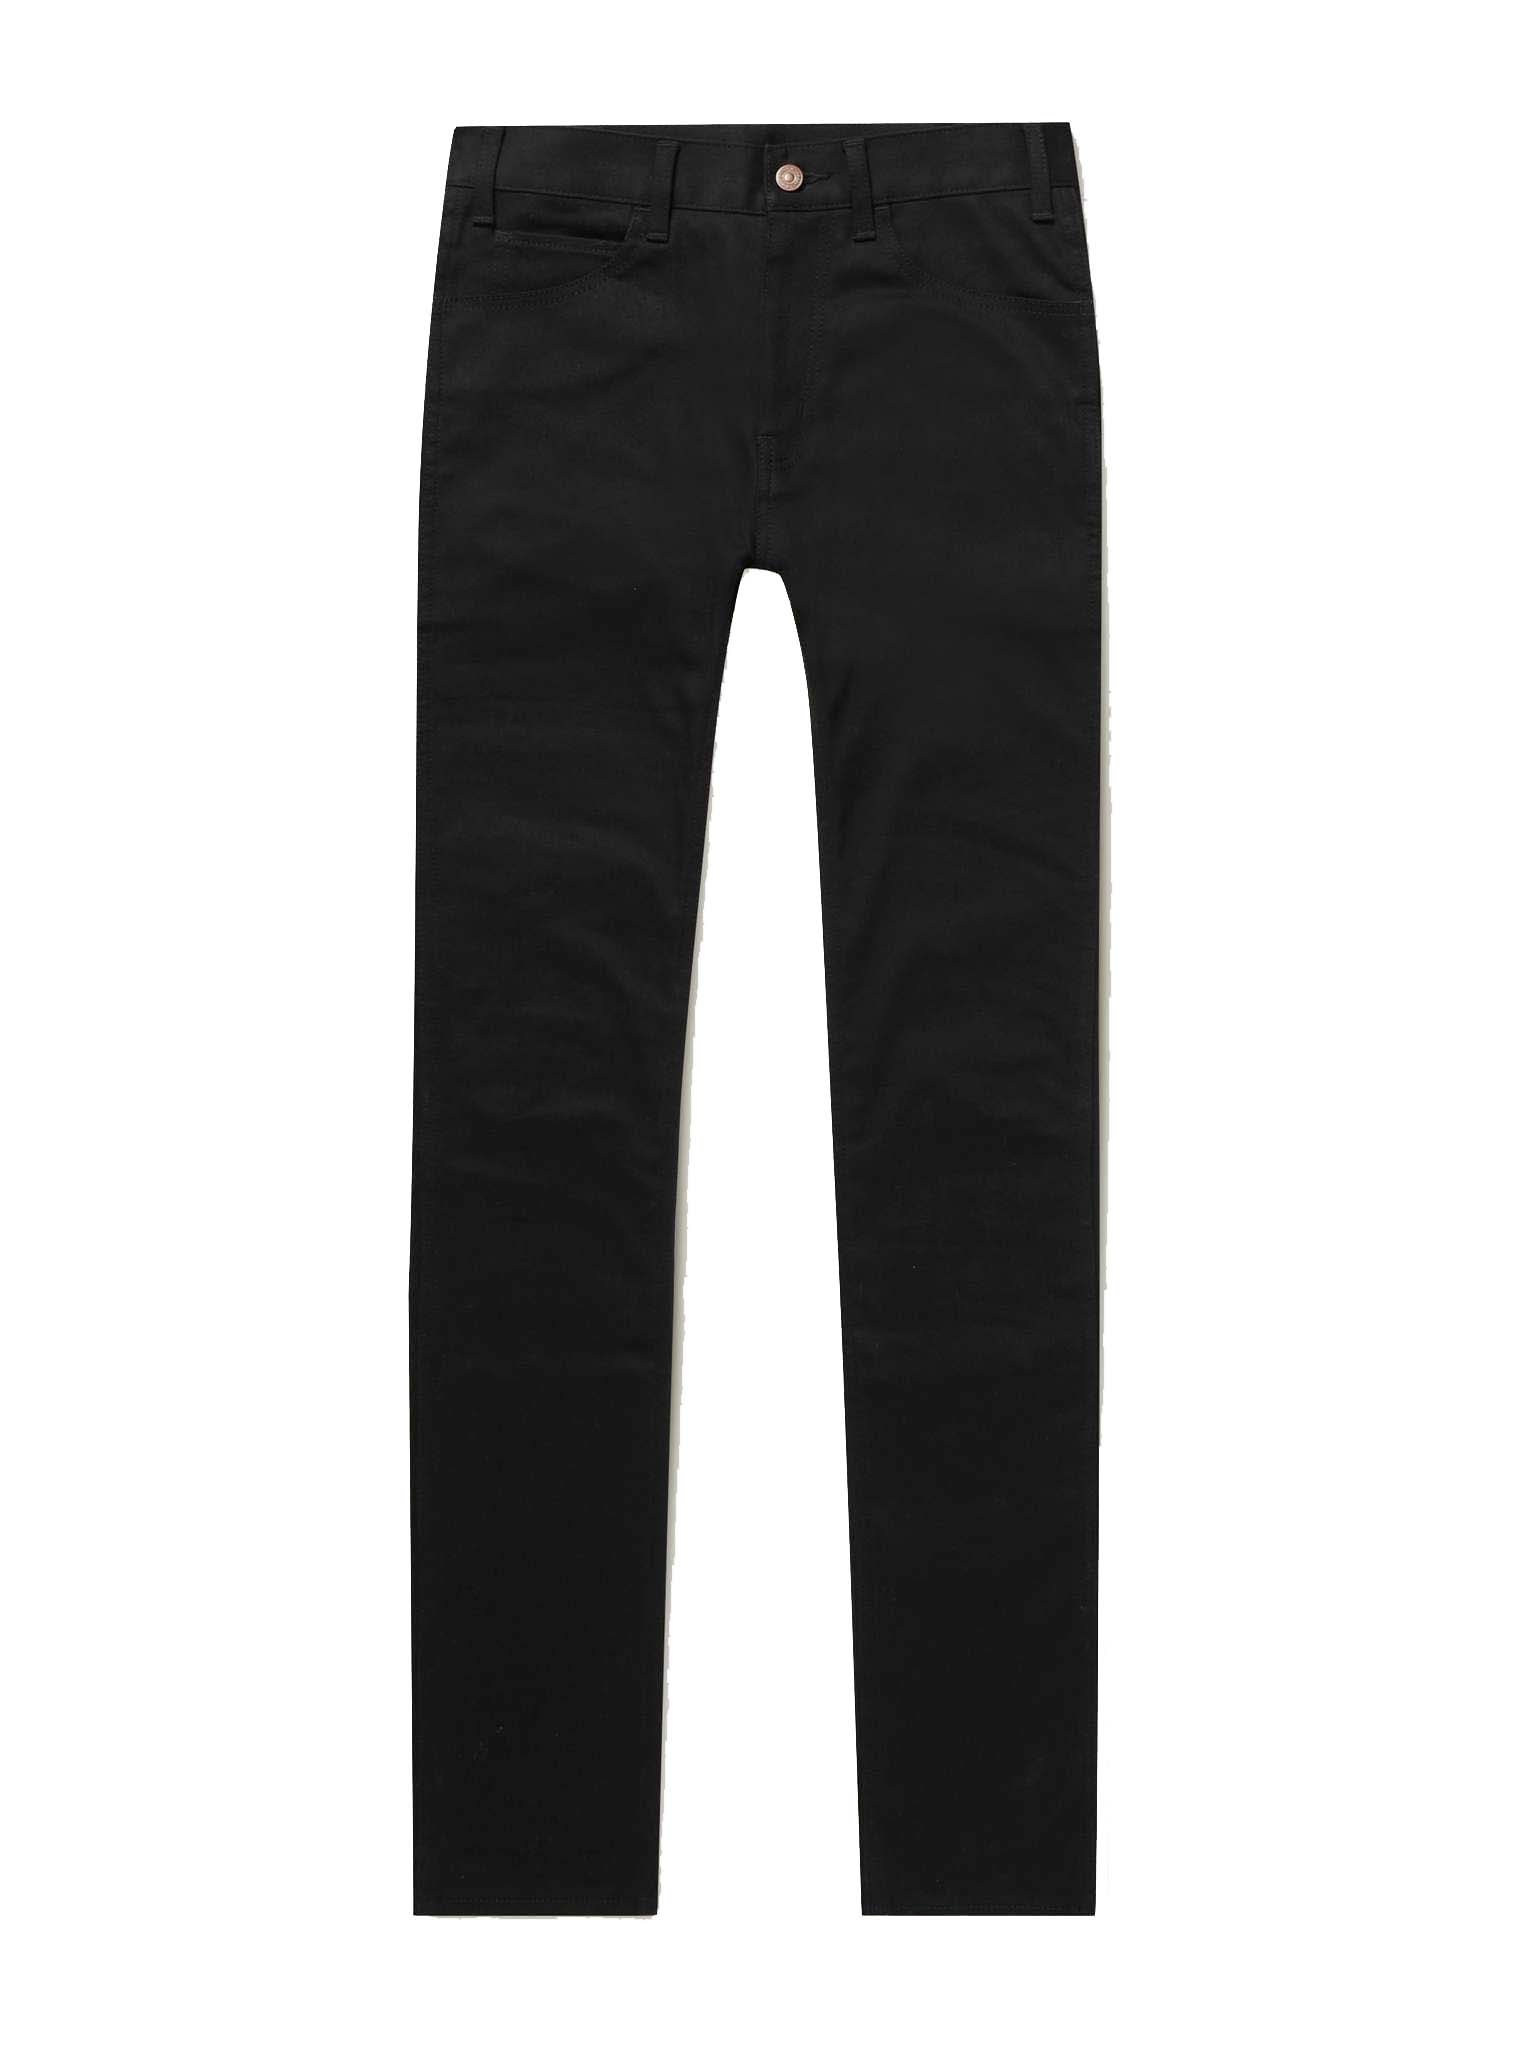 KAWS x Dior Bee Embroidery Jeans Black Men's - SS19 - US